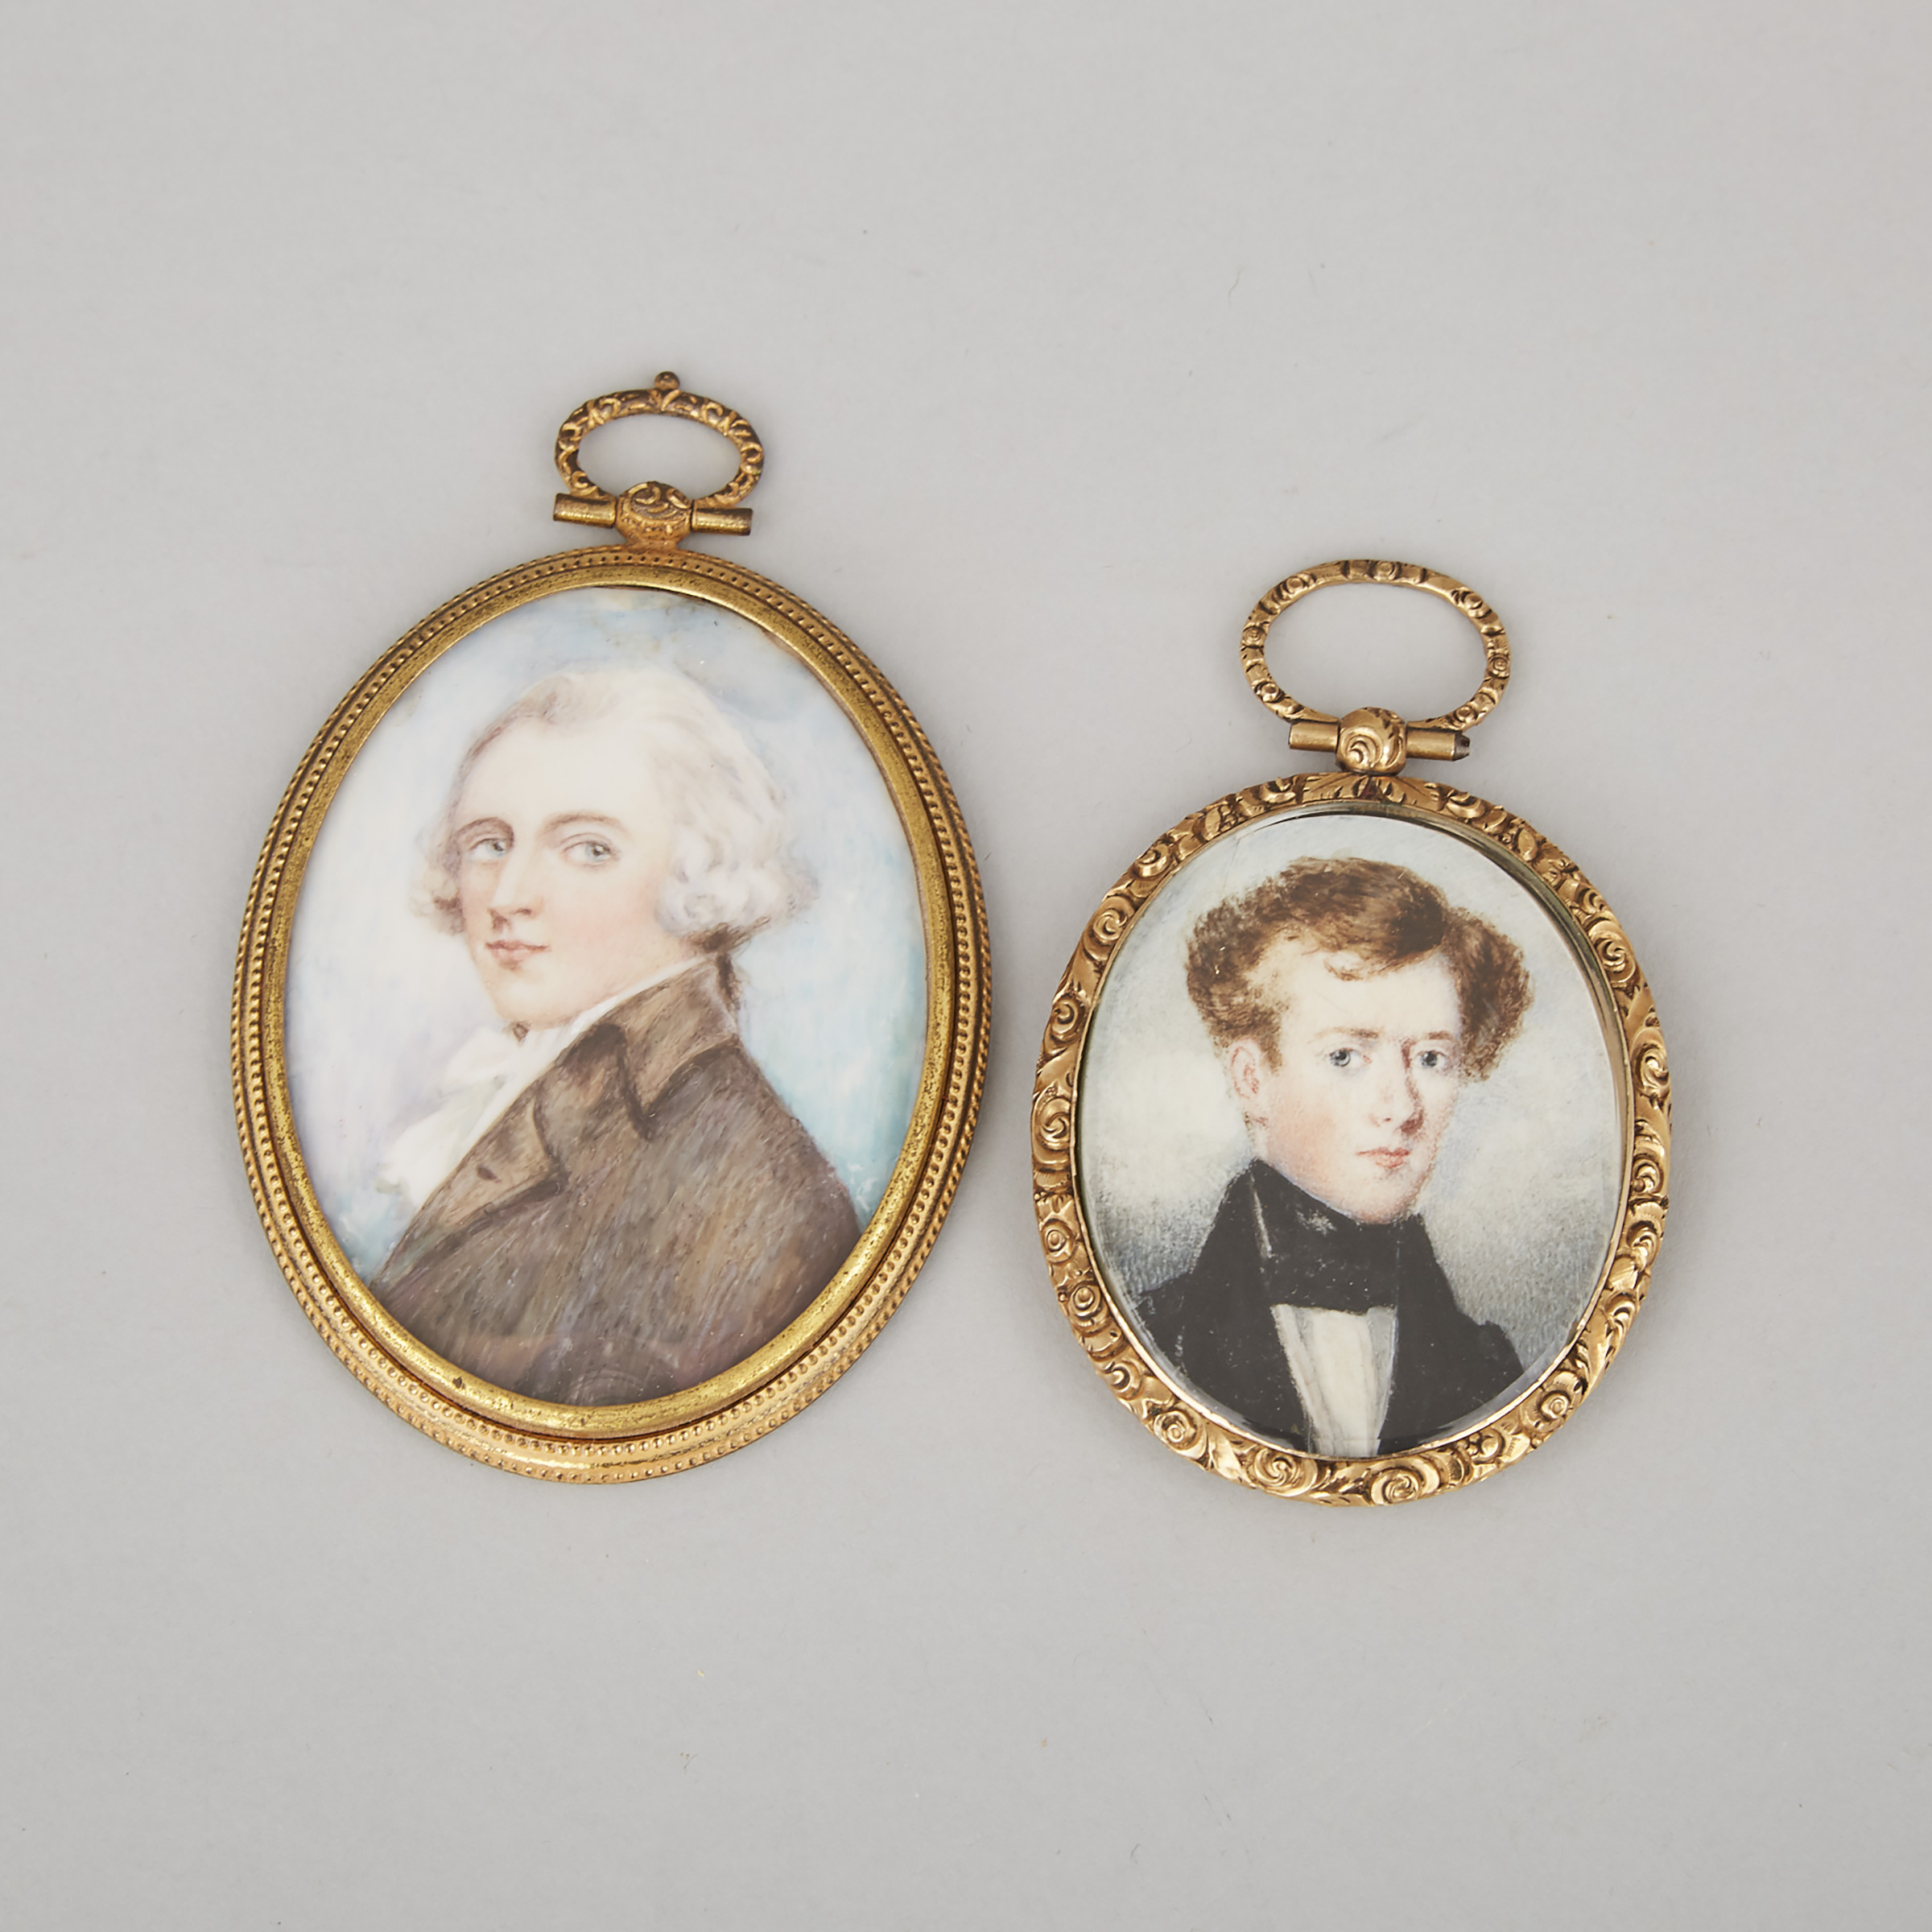 Two British School Portraits of Gentlemen, 18th/early 19th centuries